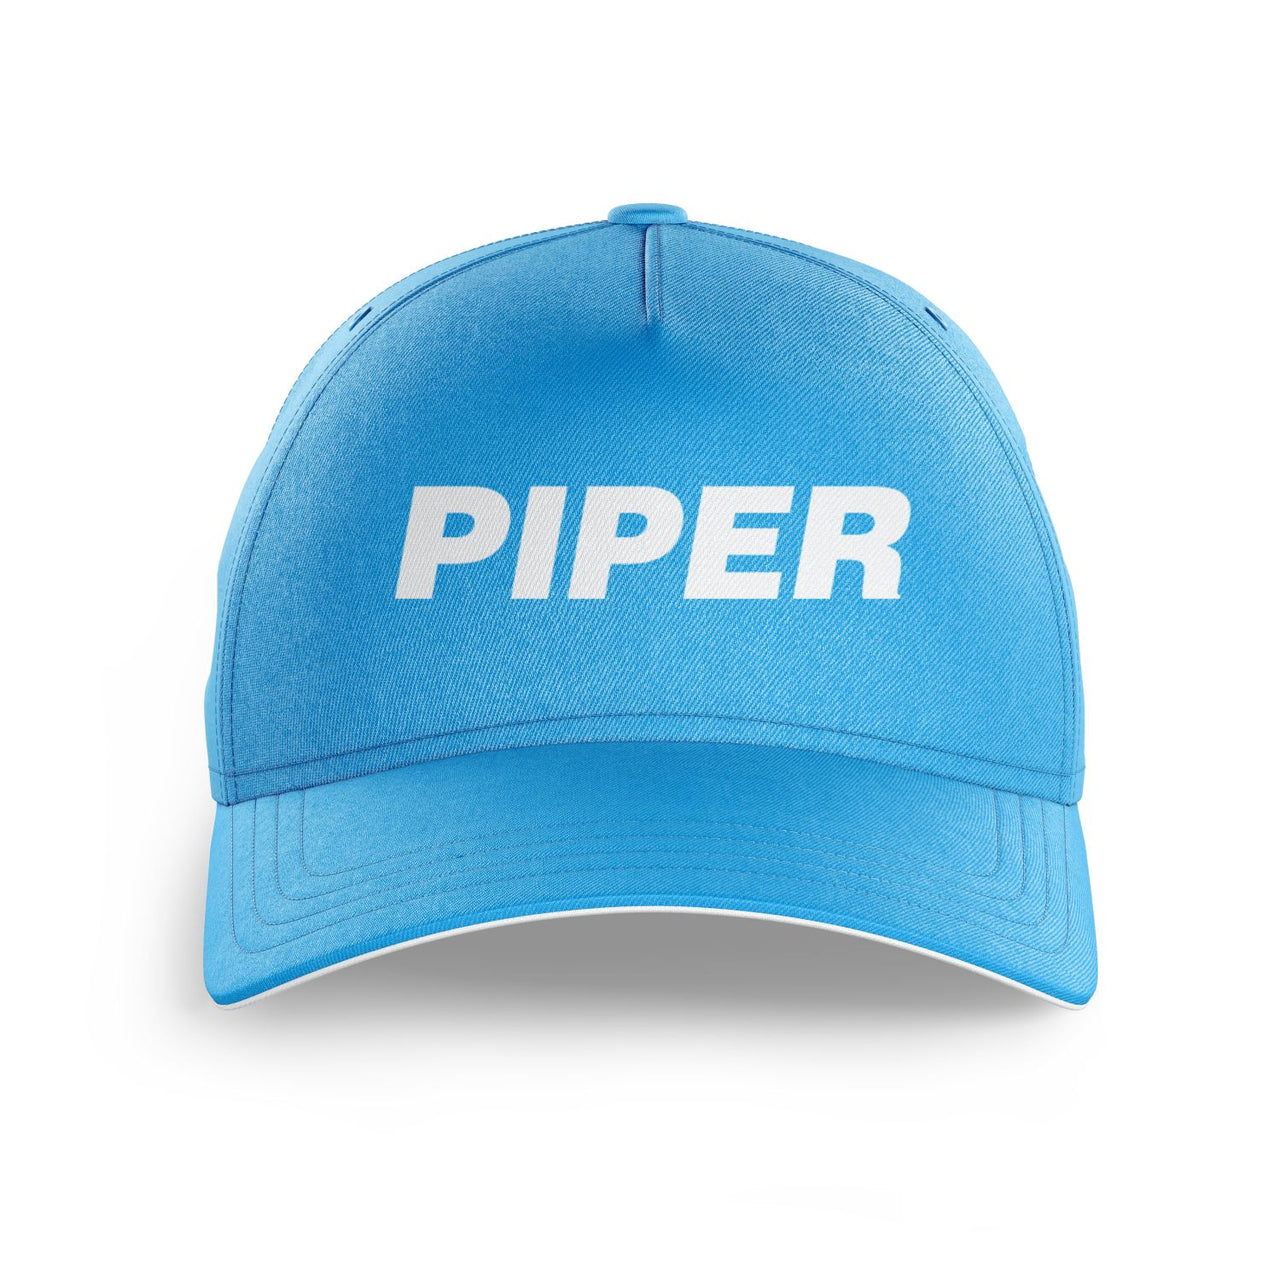 Piper & Text Printed Hats